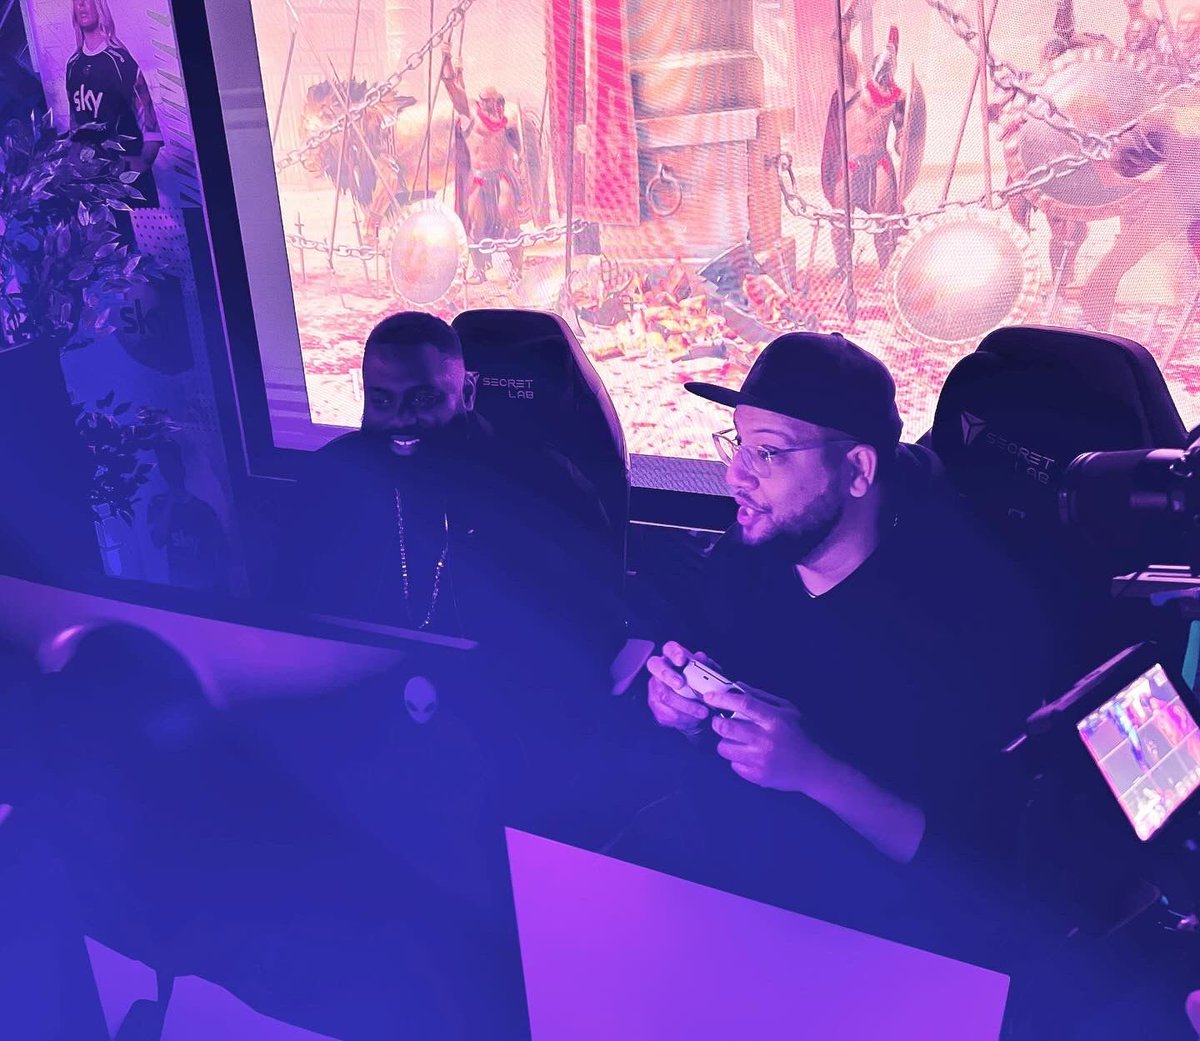 Shout out to my brother @kingpmoney for bringing me along to the @guildesports X @kungfupanda @universalpicturesuk event and being me in the Dragon Warrior Cup! Such a great night!